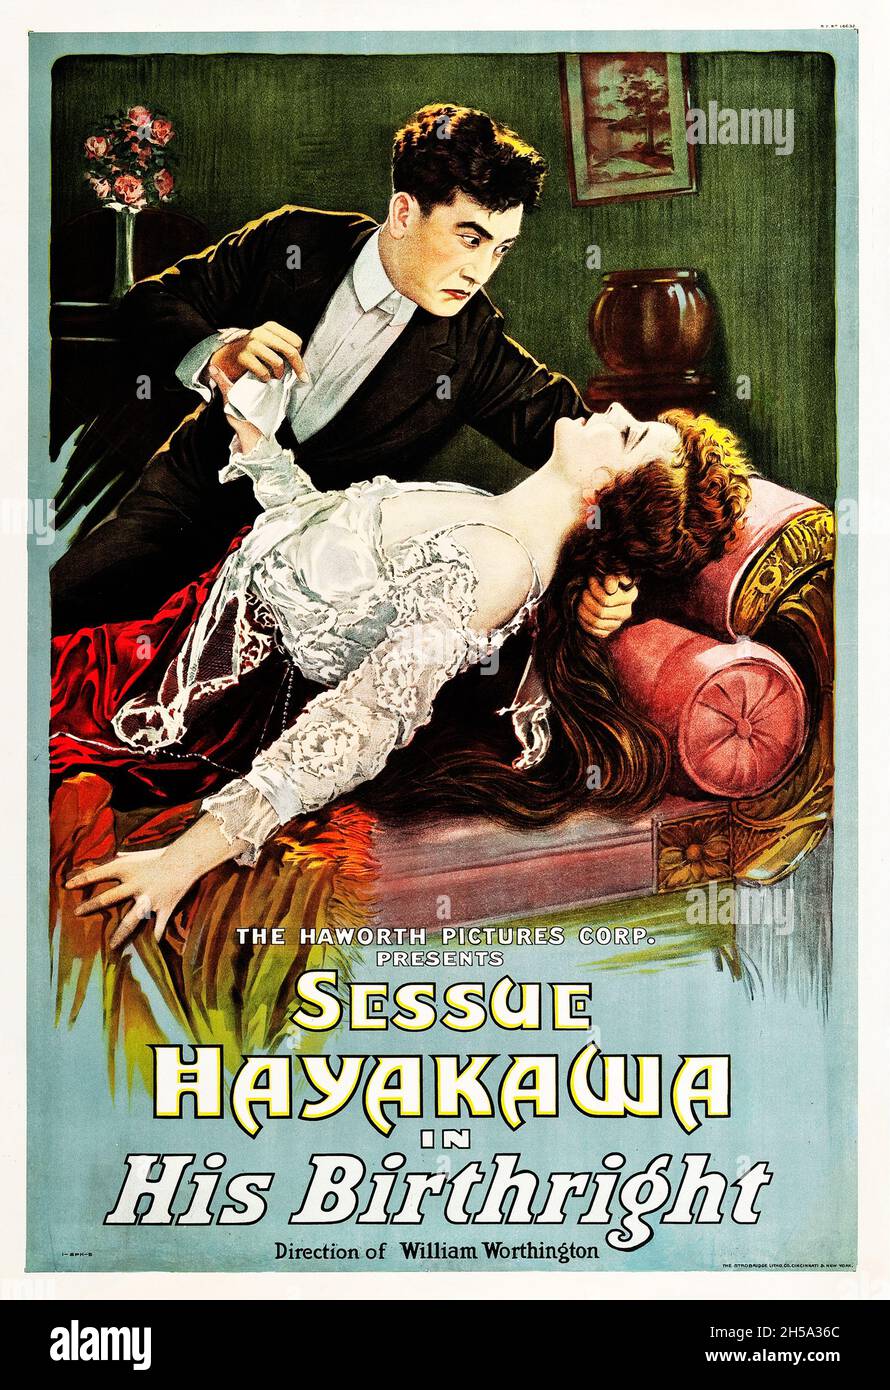 Vintage movie poster: His Birthright (Haworth Pictures Corp., 1918) feat Sessue Hayakawa. Stock Photo